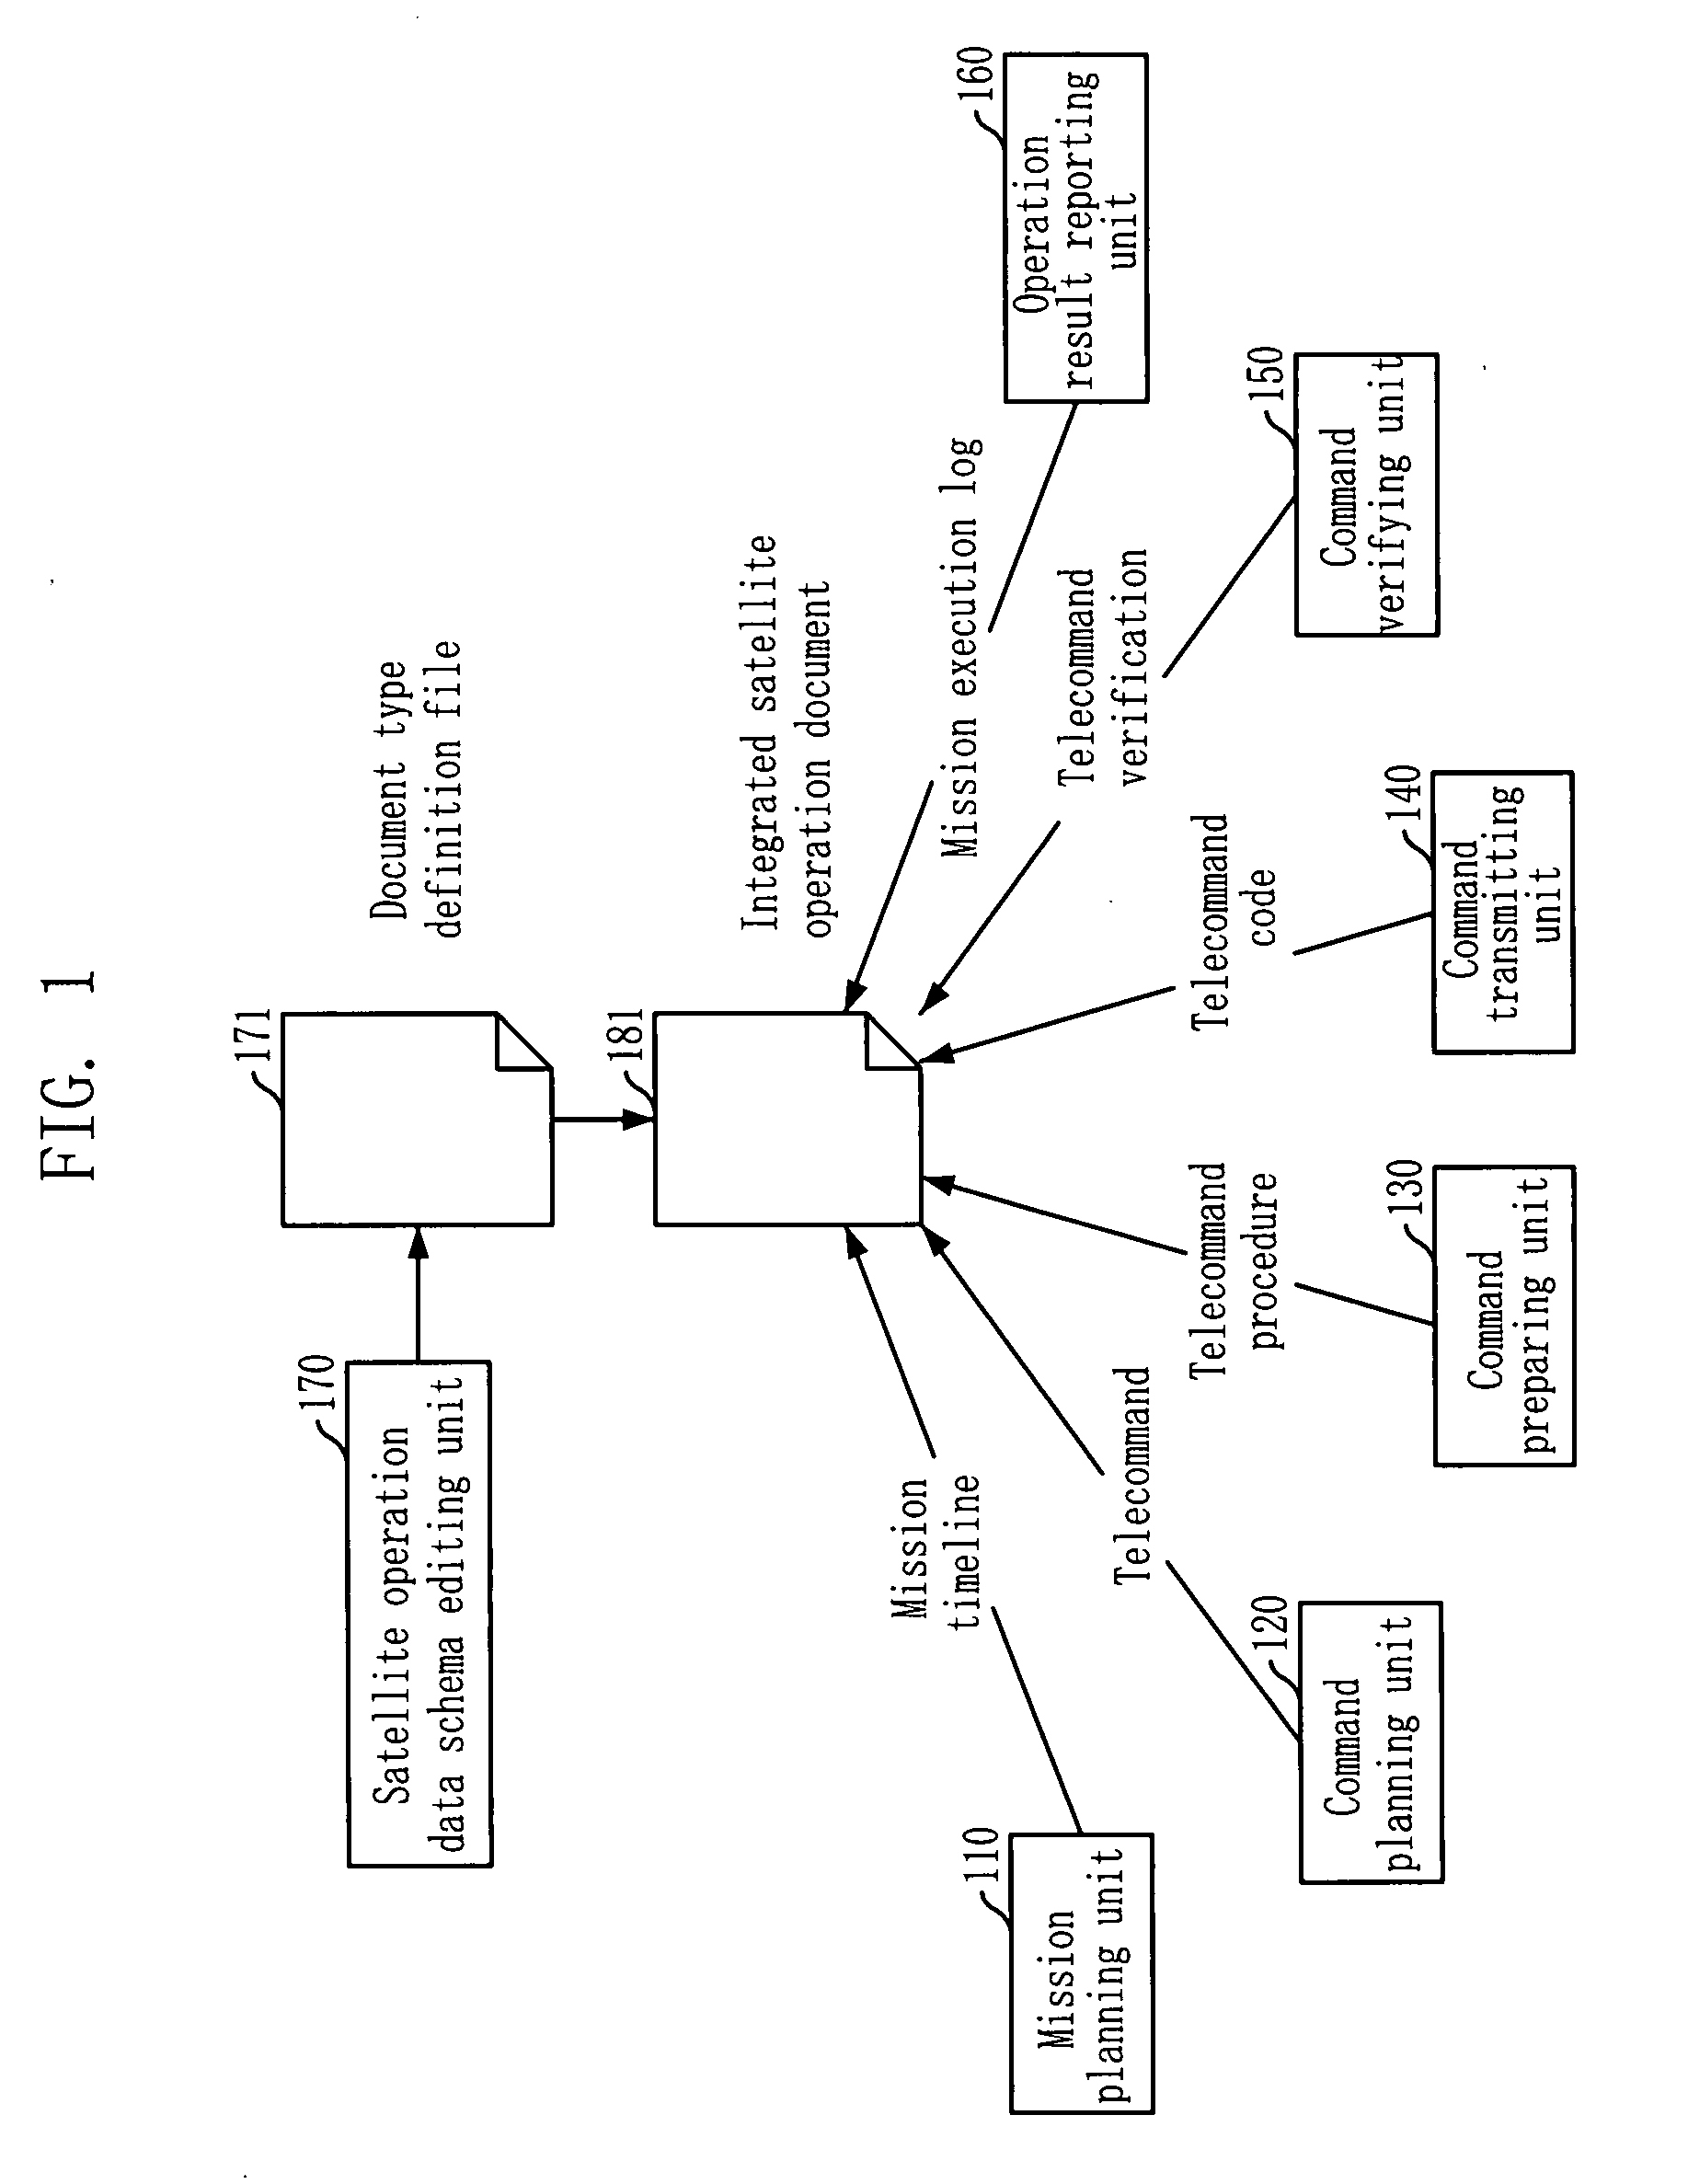 System and method for controlling satellite based on integrated satellite operation data